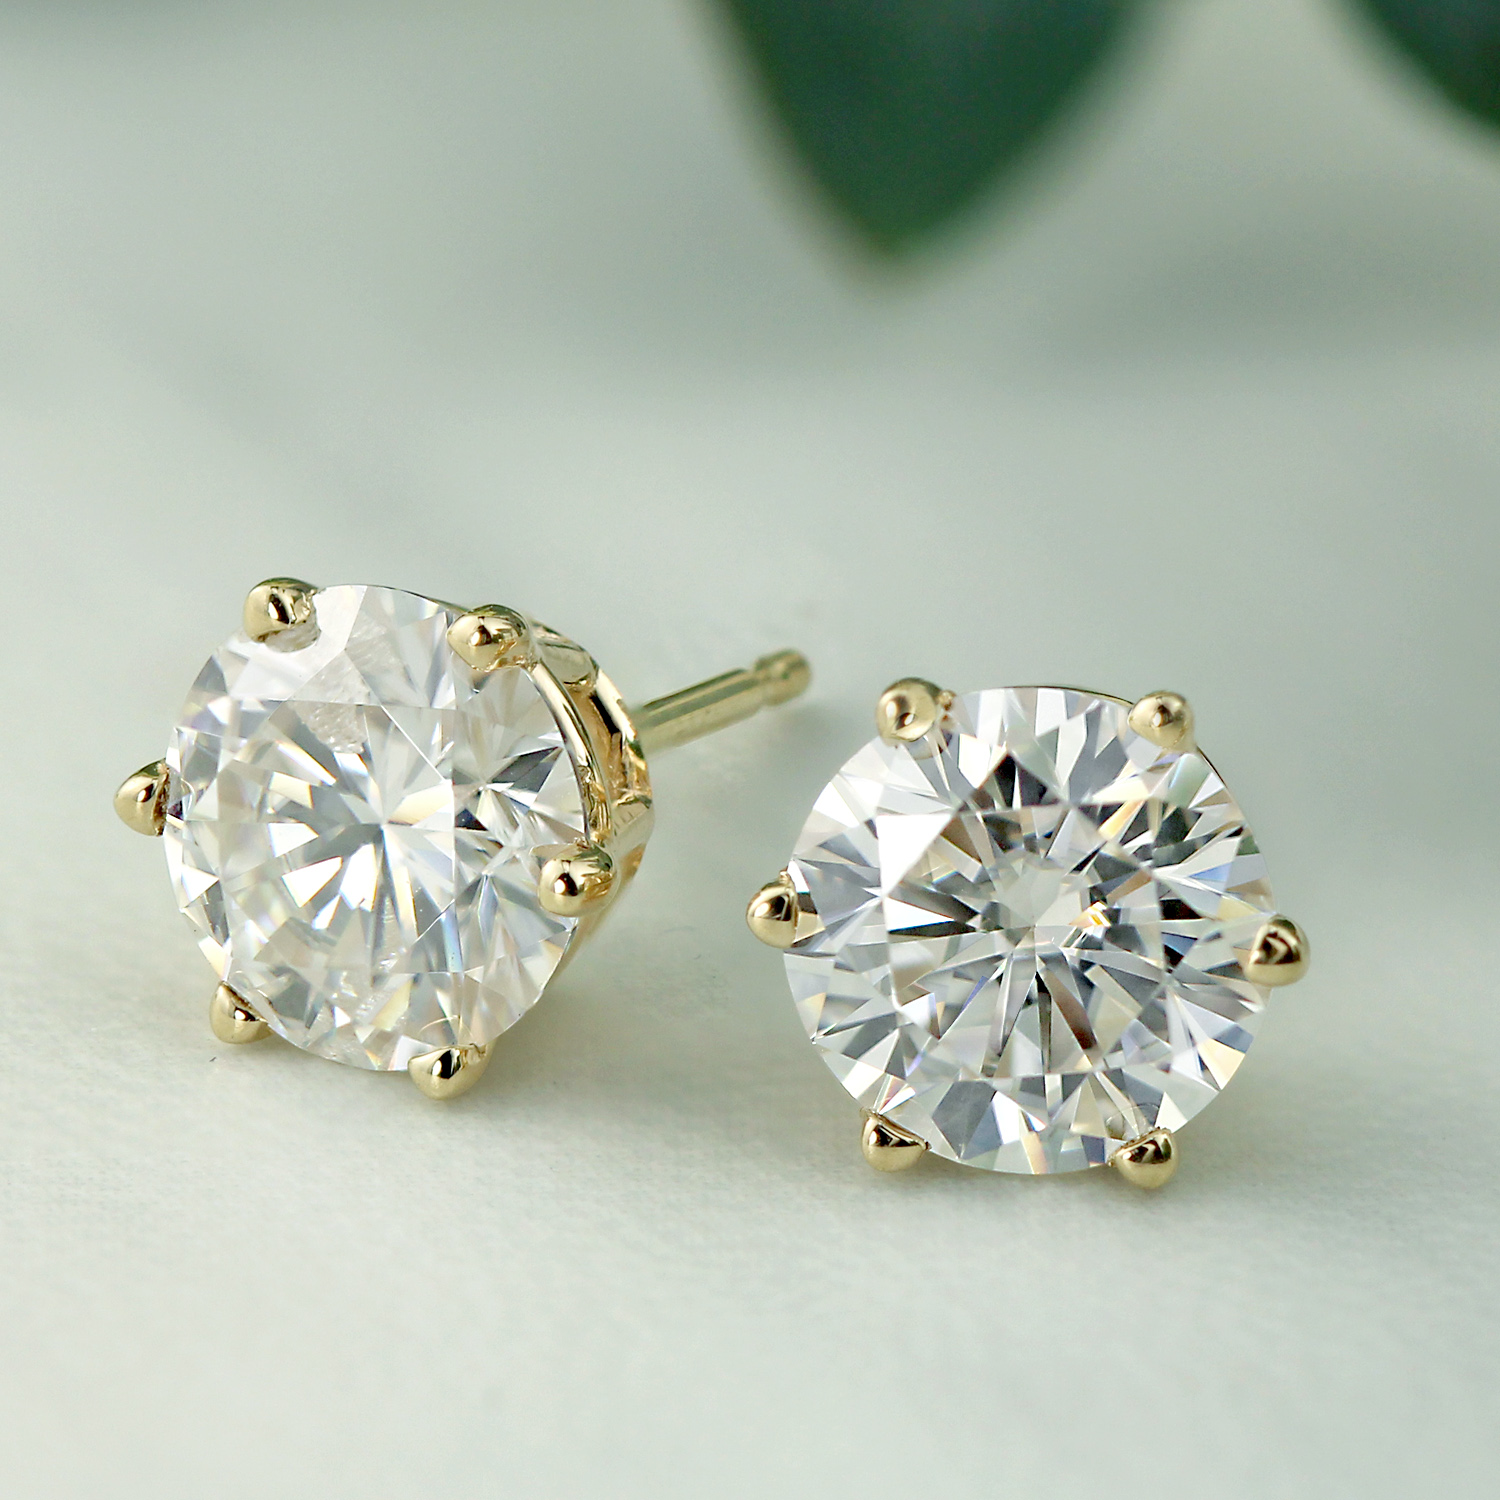 A Step-By-Step Guide to Choosing Your Perfect Diamond Stud